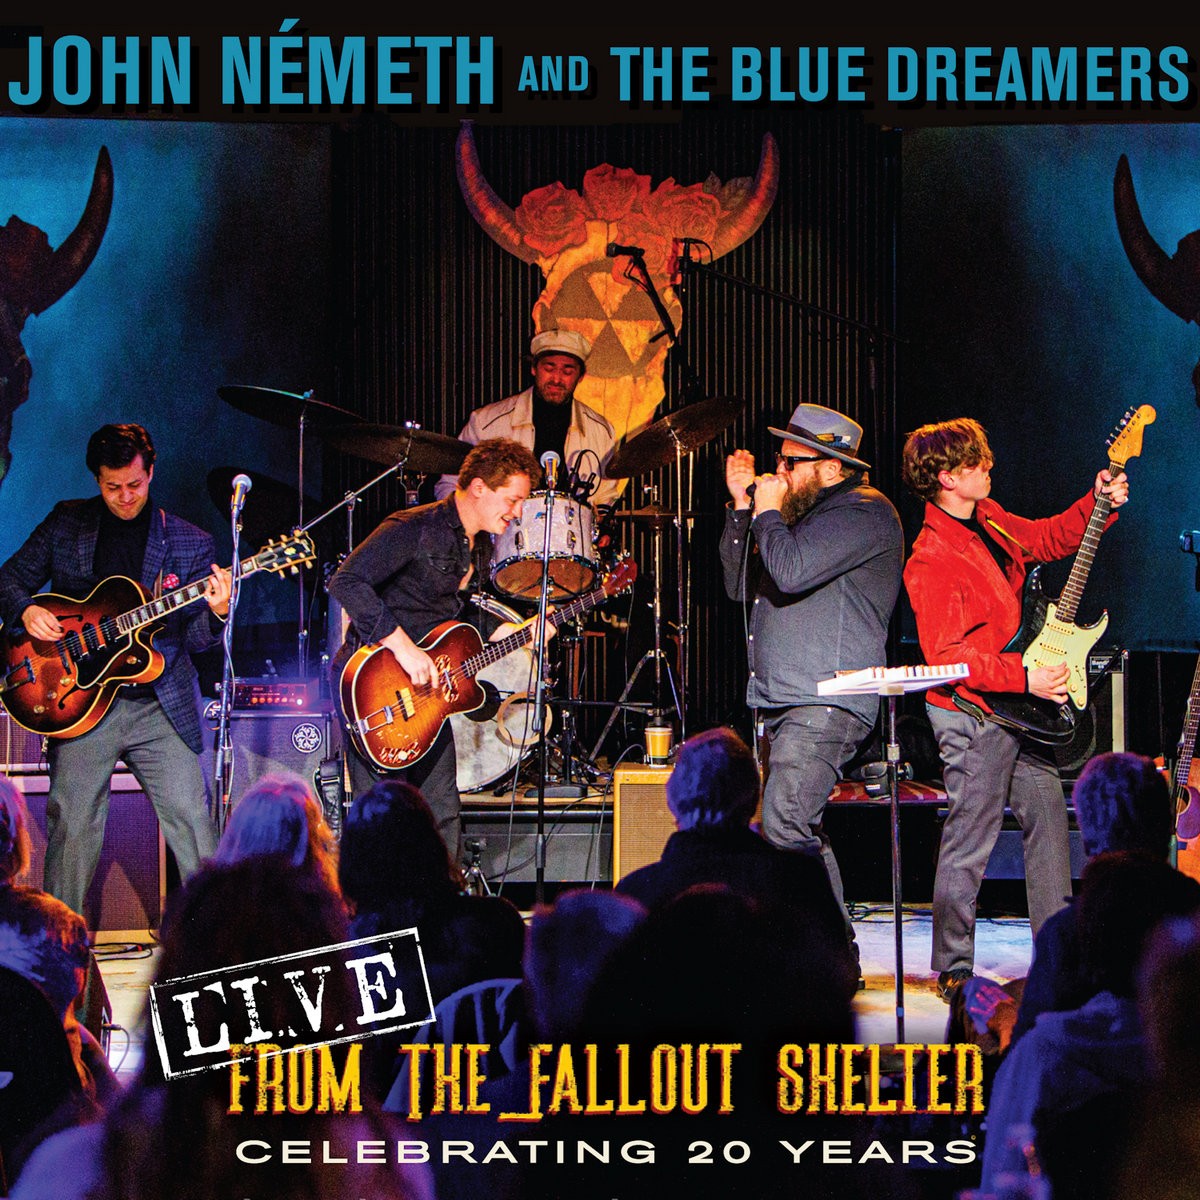 John Németh & The Blue Dreamers - Live from the Fallout Shelter Celebrating 20 Years